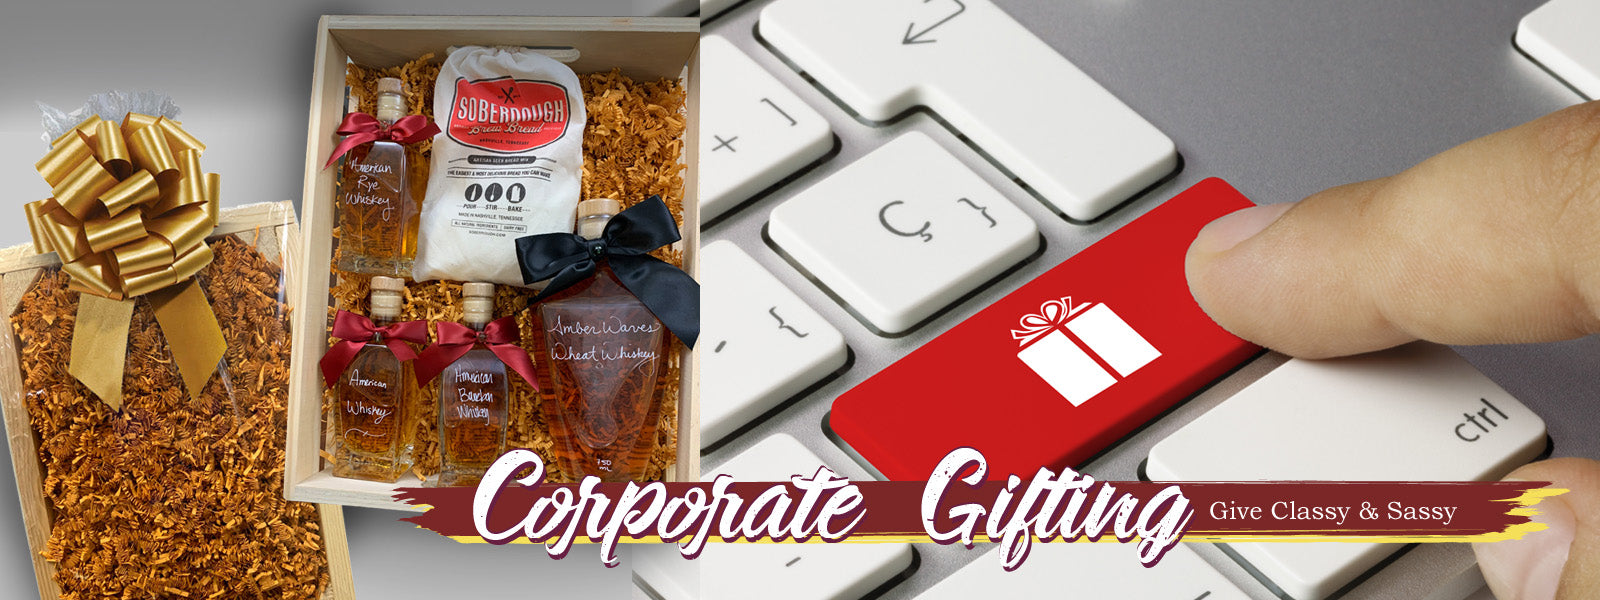 Explore unique Corporate Gift Items for Employees.